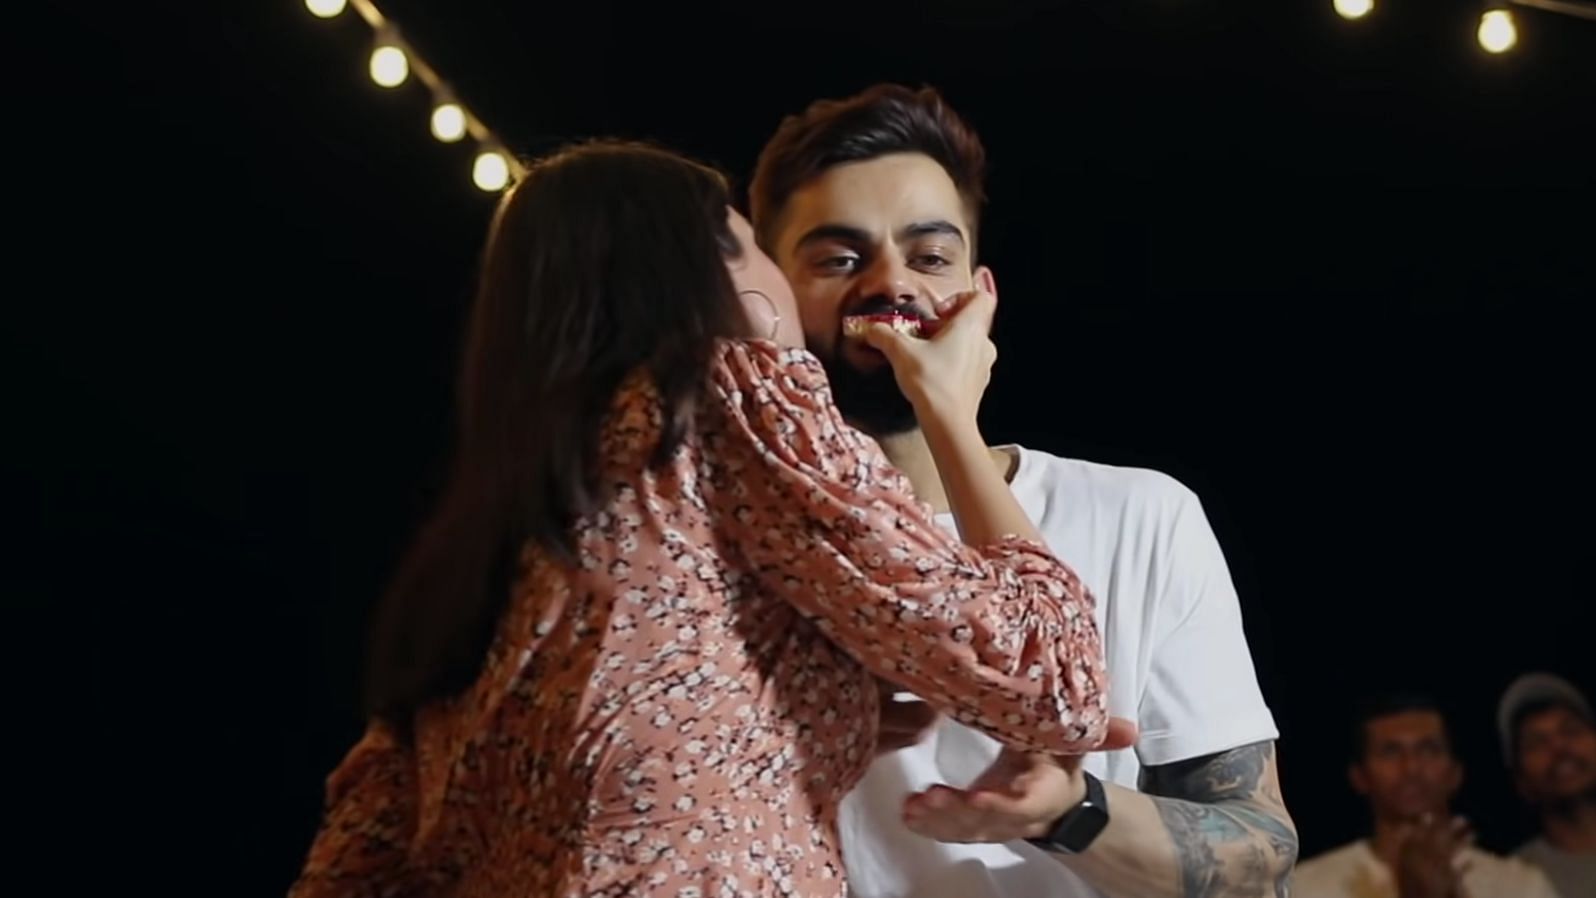 Watch Virat Kohli talk after announcing he and Anushka are expecting their first baby in Jan, 2021.